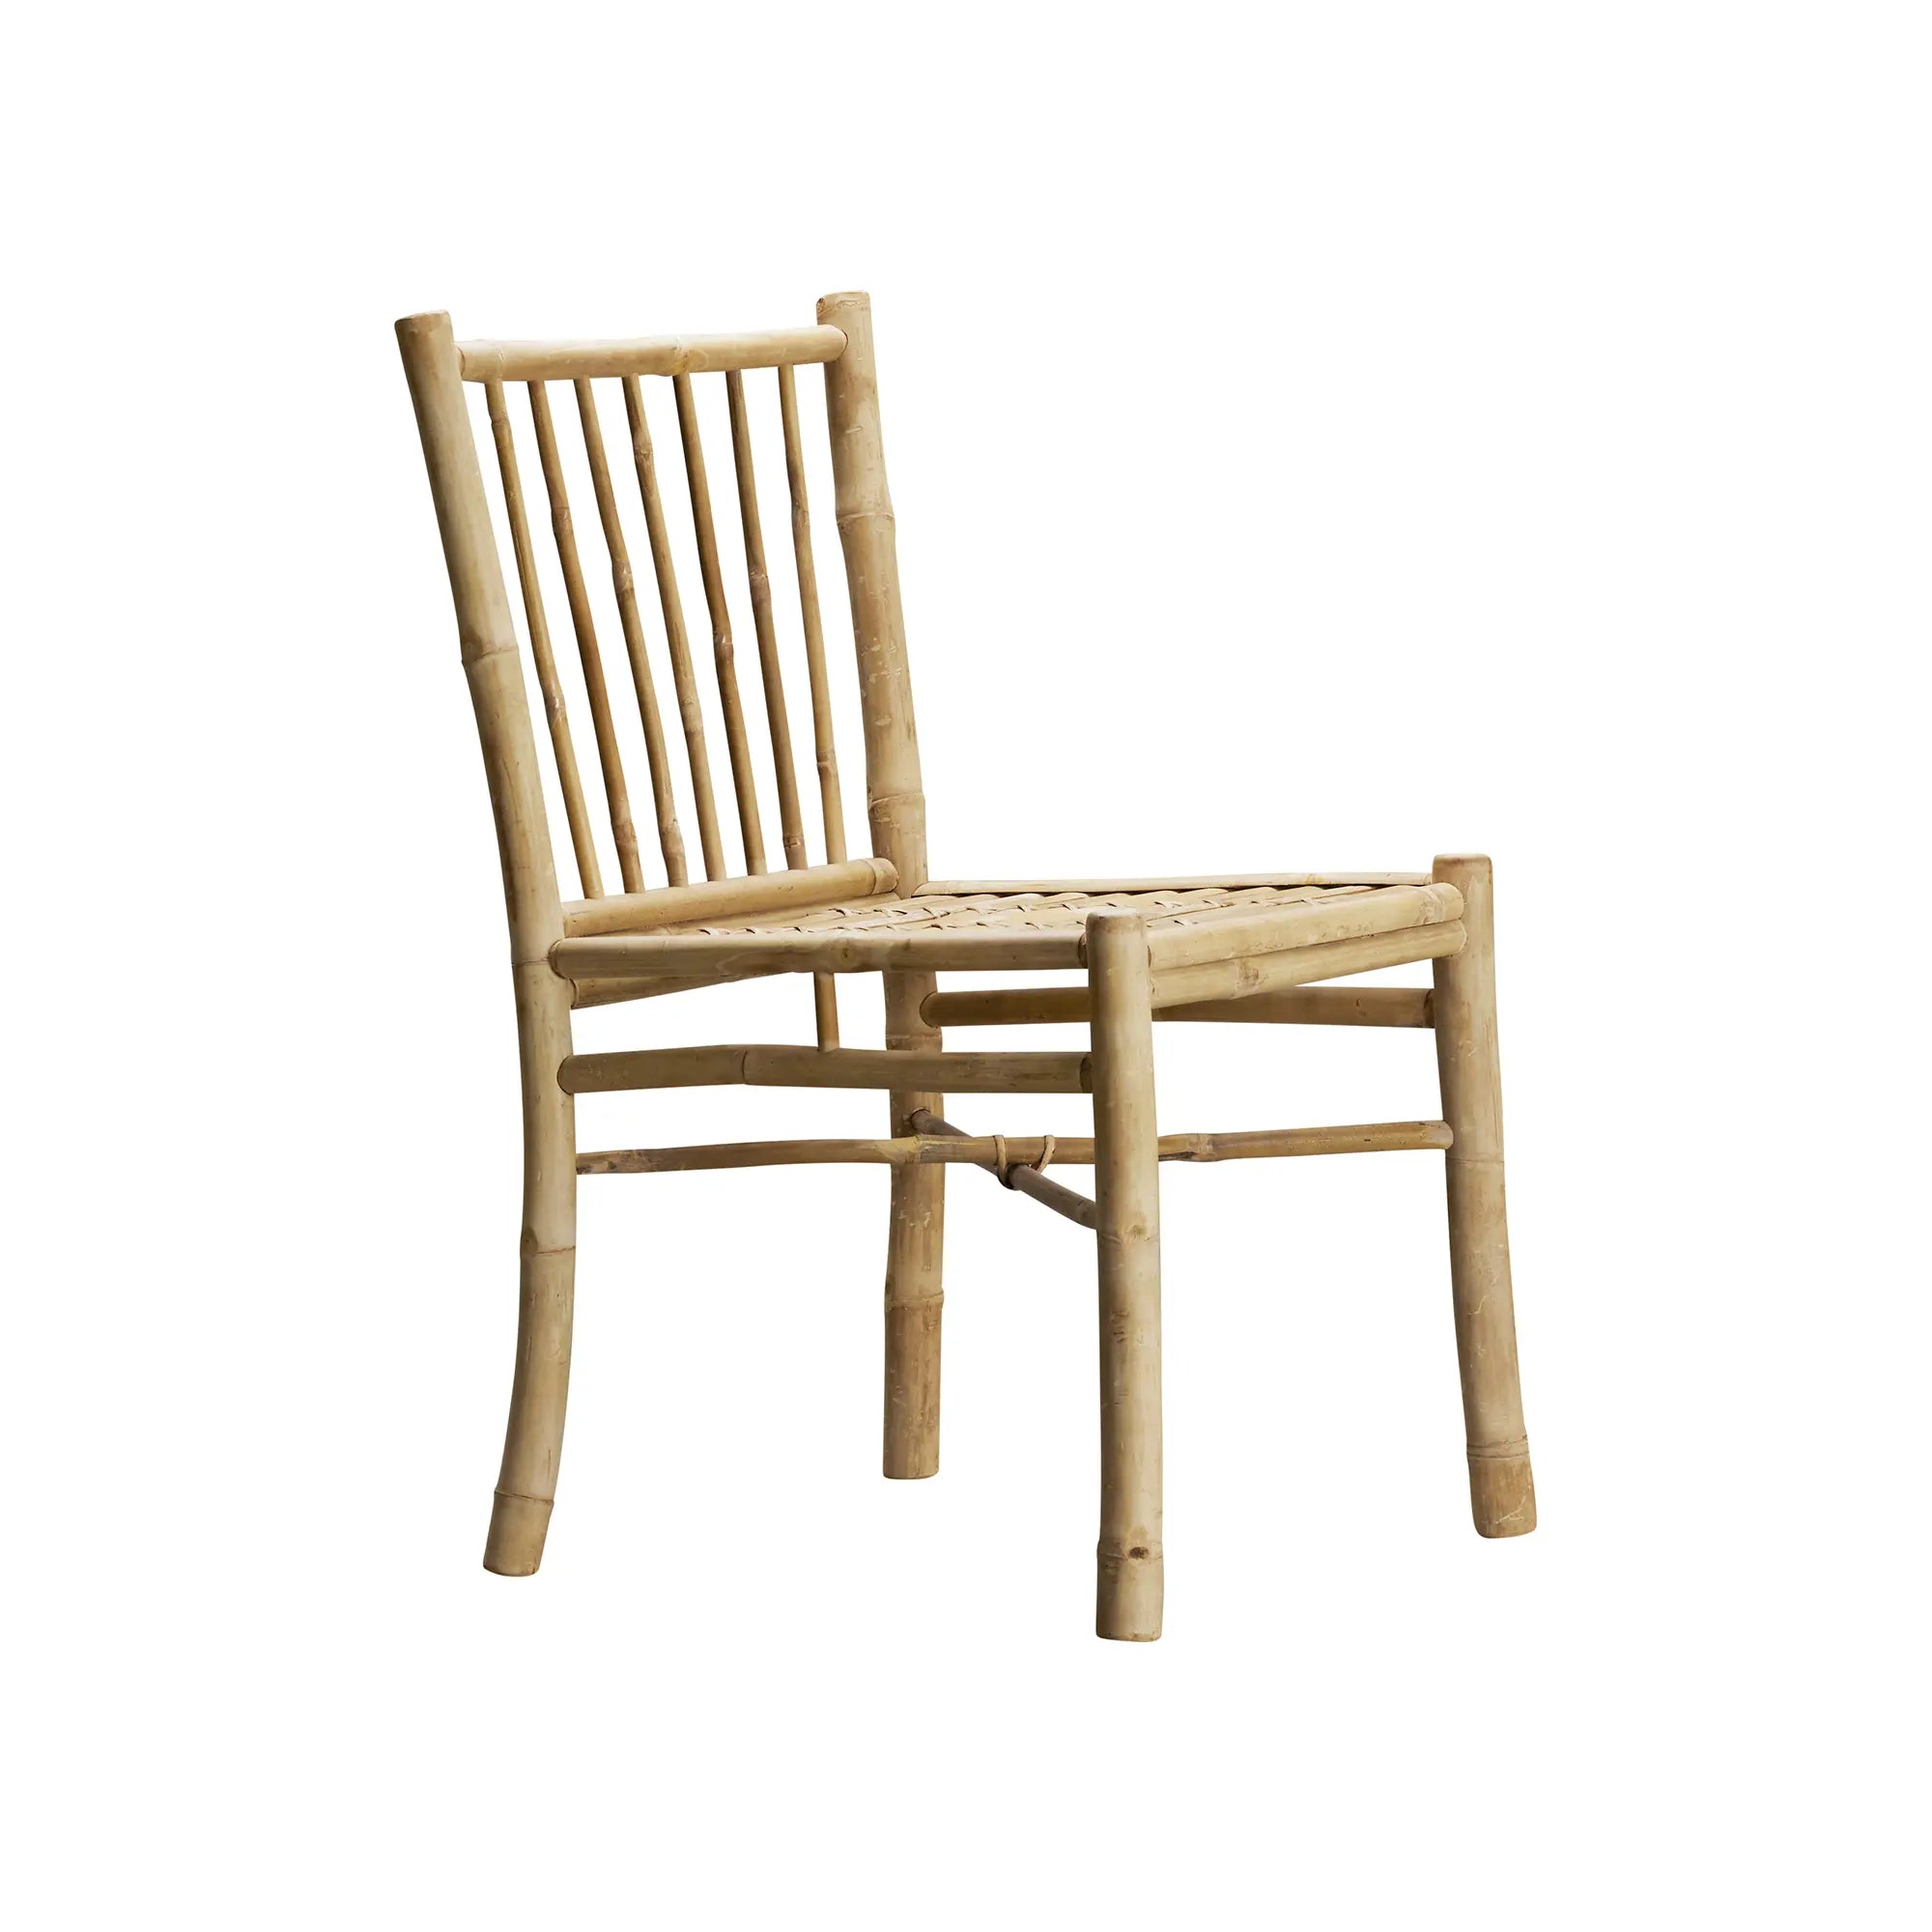 Outdoor Bamboo Dining Chair - Set of 4